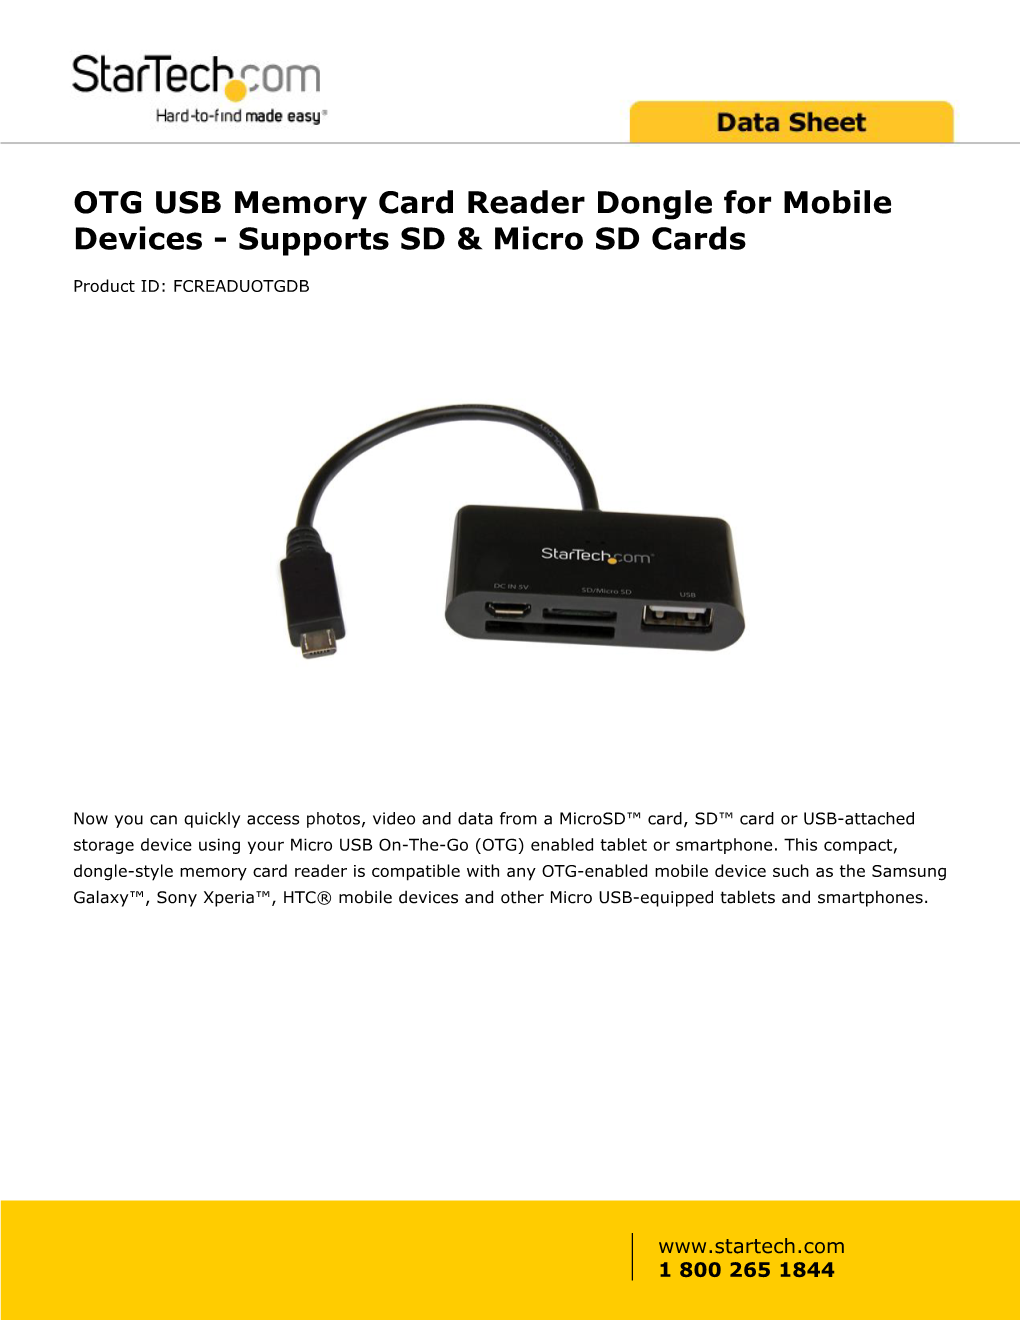 OTG USB Memory Card Reader Dongle for Mobile Devices - Supports SD & Micro SD Cards